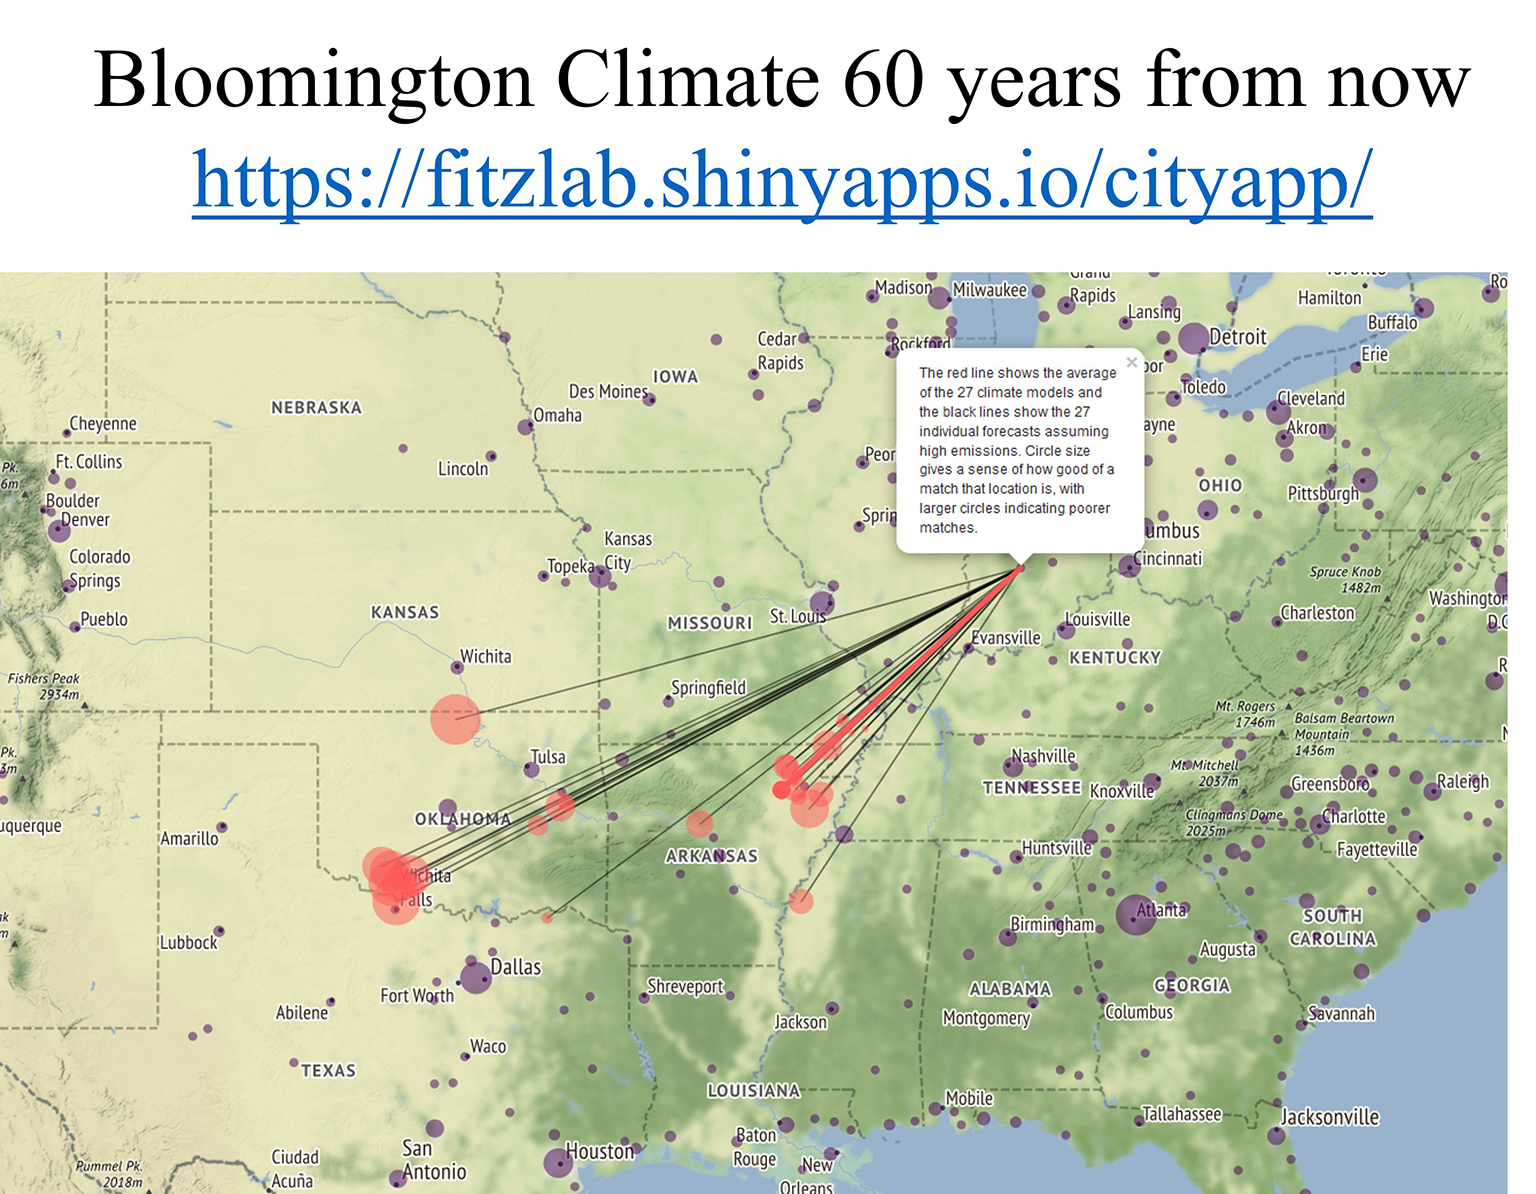 A map projecting how Bloomington, Ind.’s climate will compare to present-day cities in the southwest US in 60 years (2082).  The map averages 27 climate models, indicating that Bloomington's climate could be more like that of Wichita Falls, Texas; the Kansas-Oklahoma border; or northeastern Arkansas.